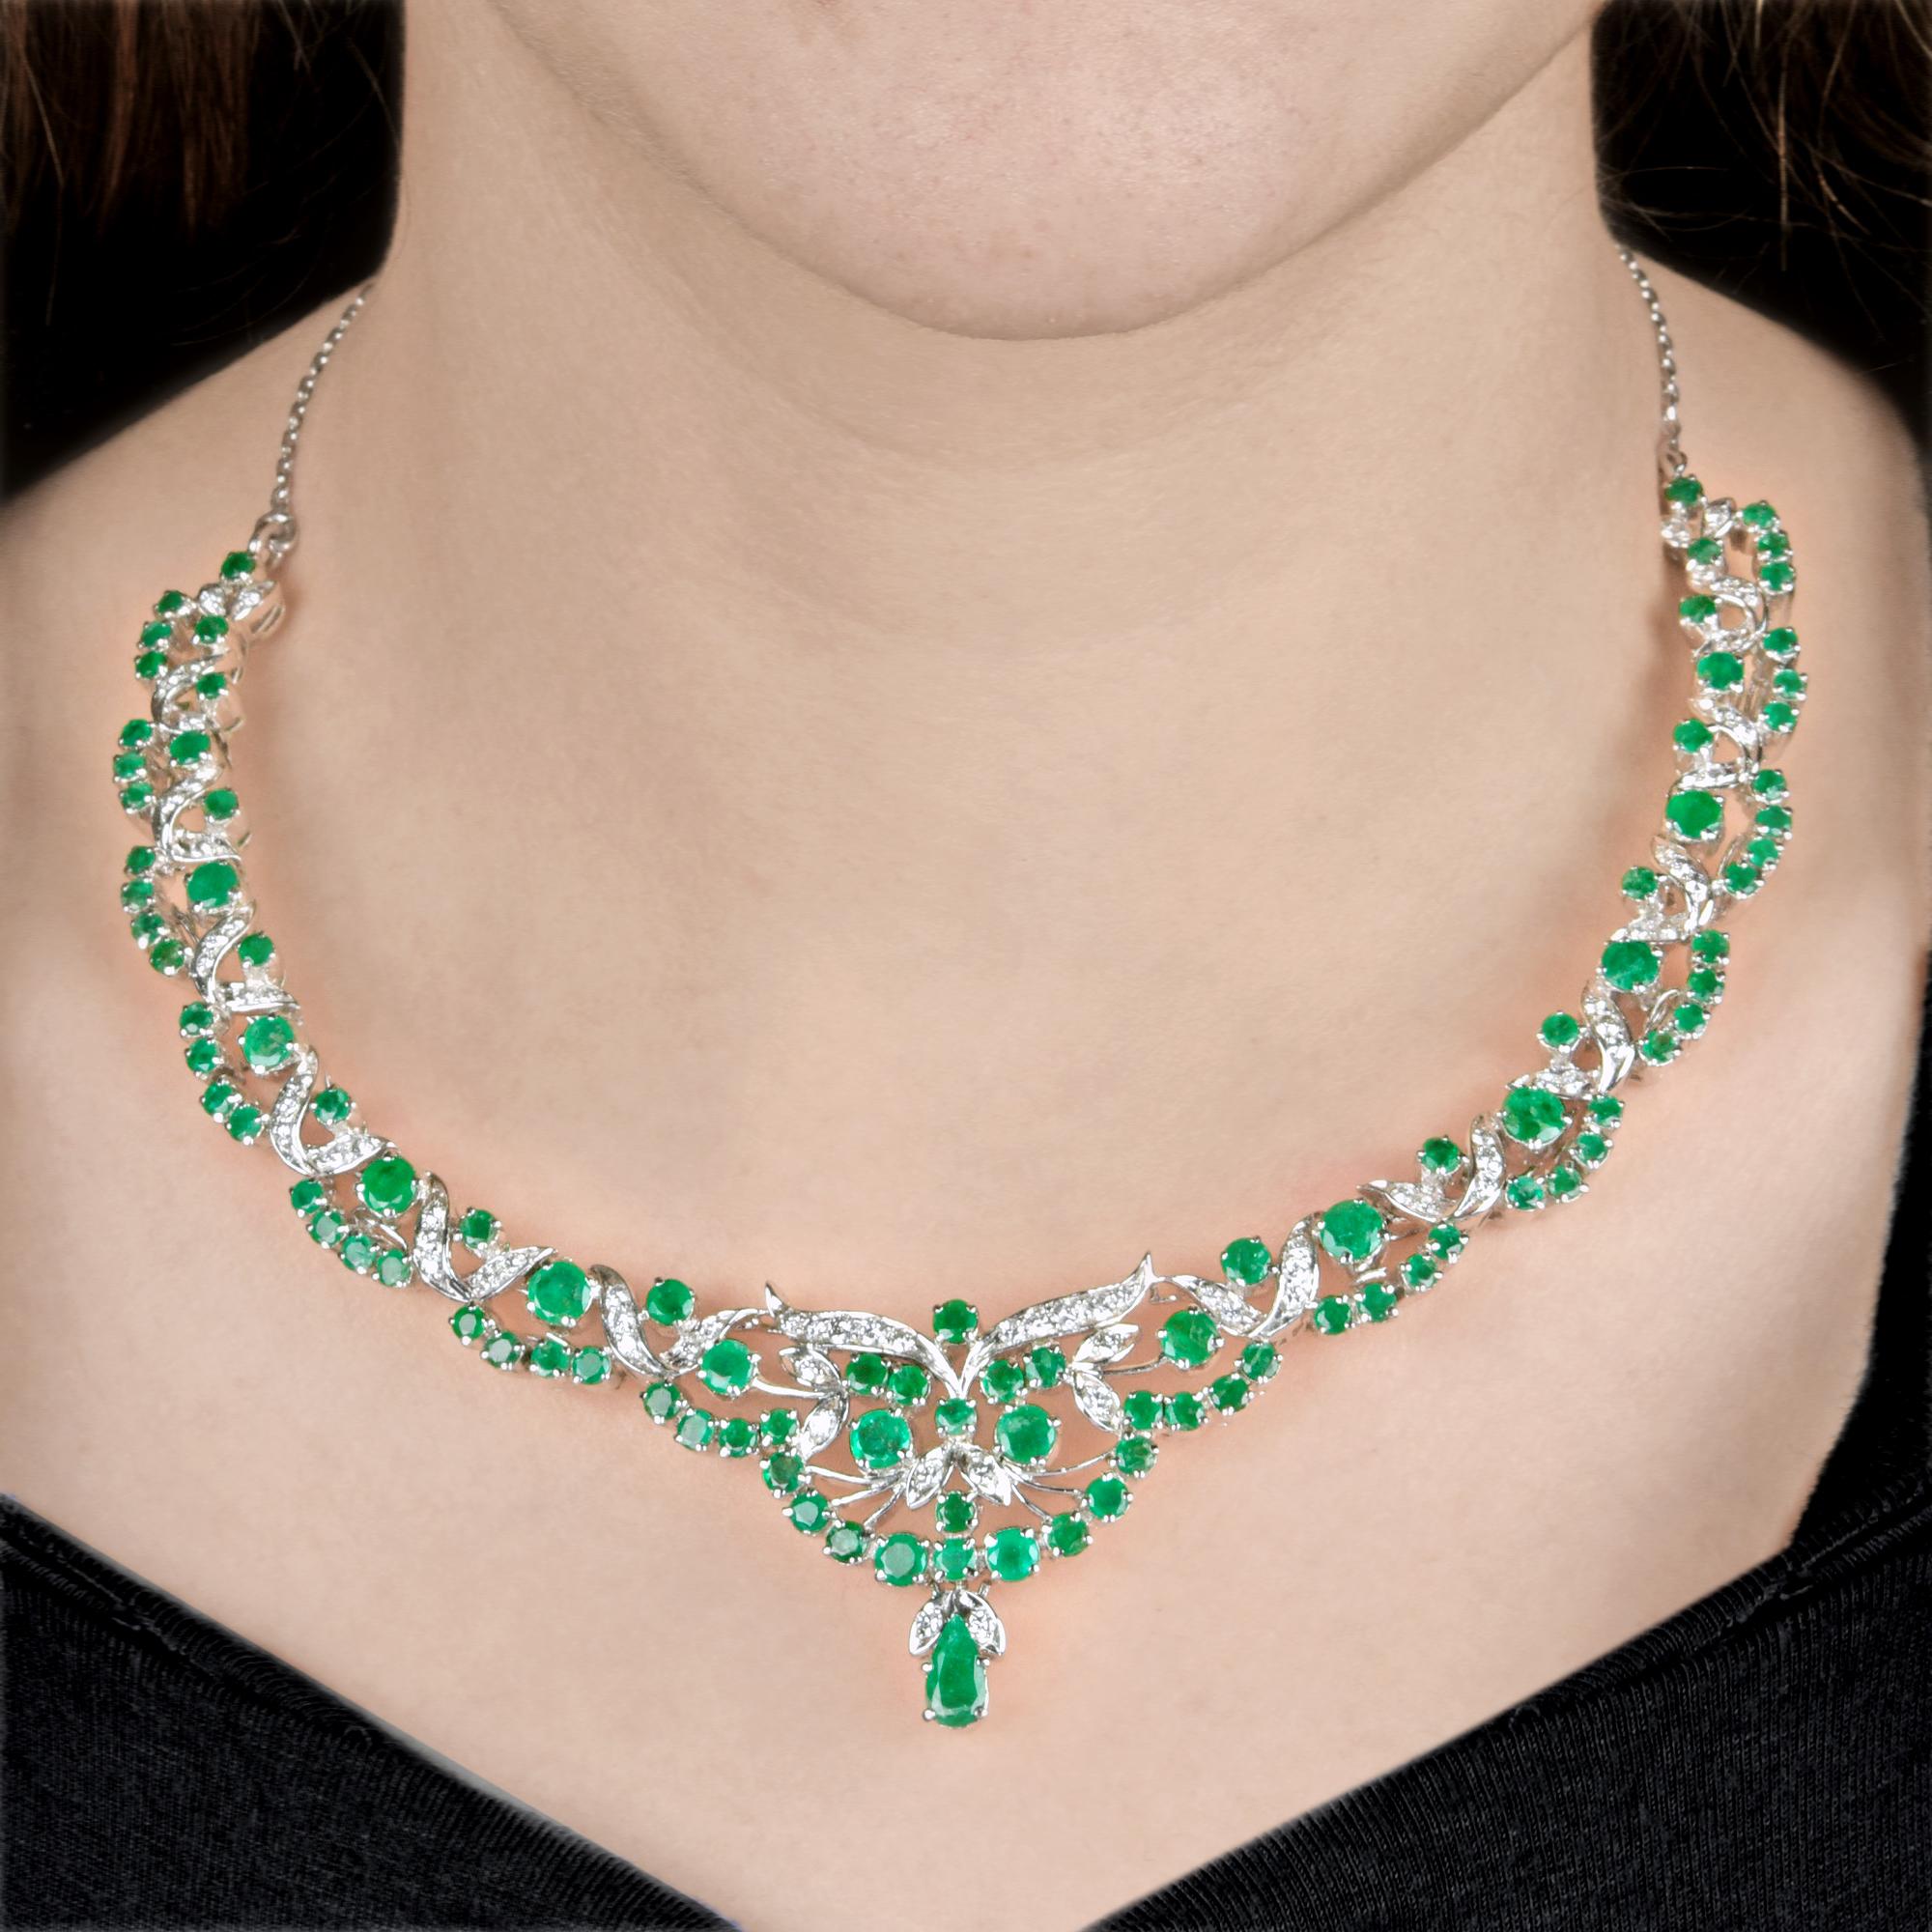 Modern Natural Emerald Gemstone Earrings Necklace Set Diamond Silver Fine Jewelry For Sale